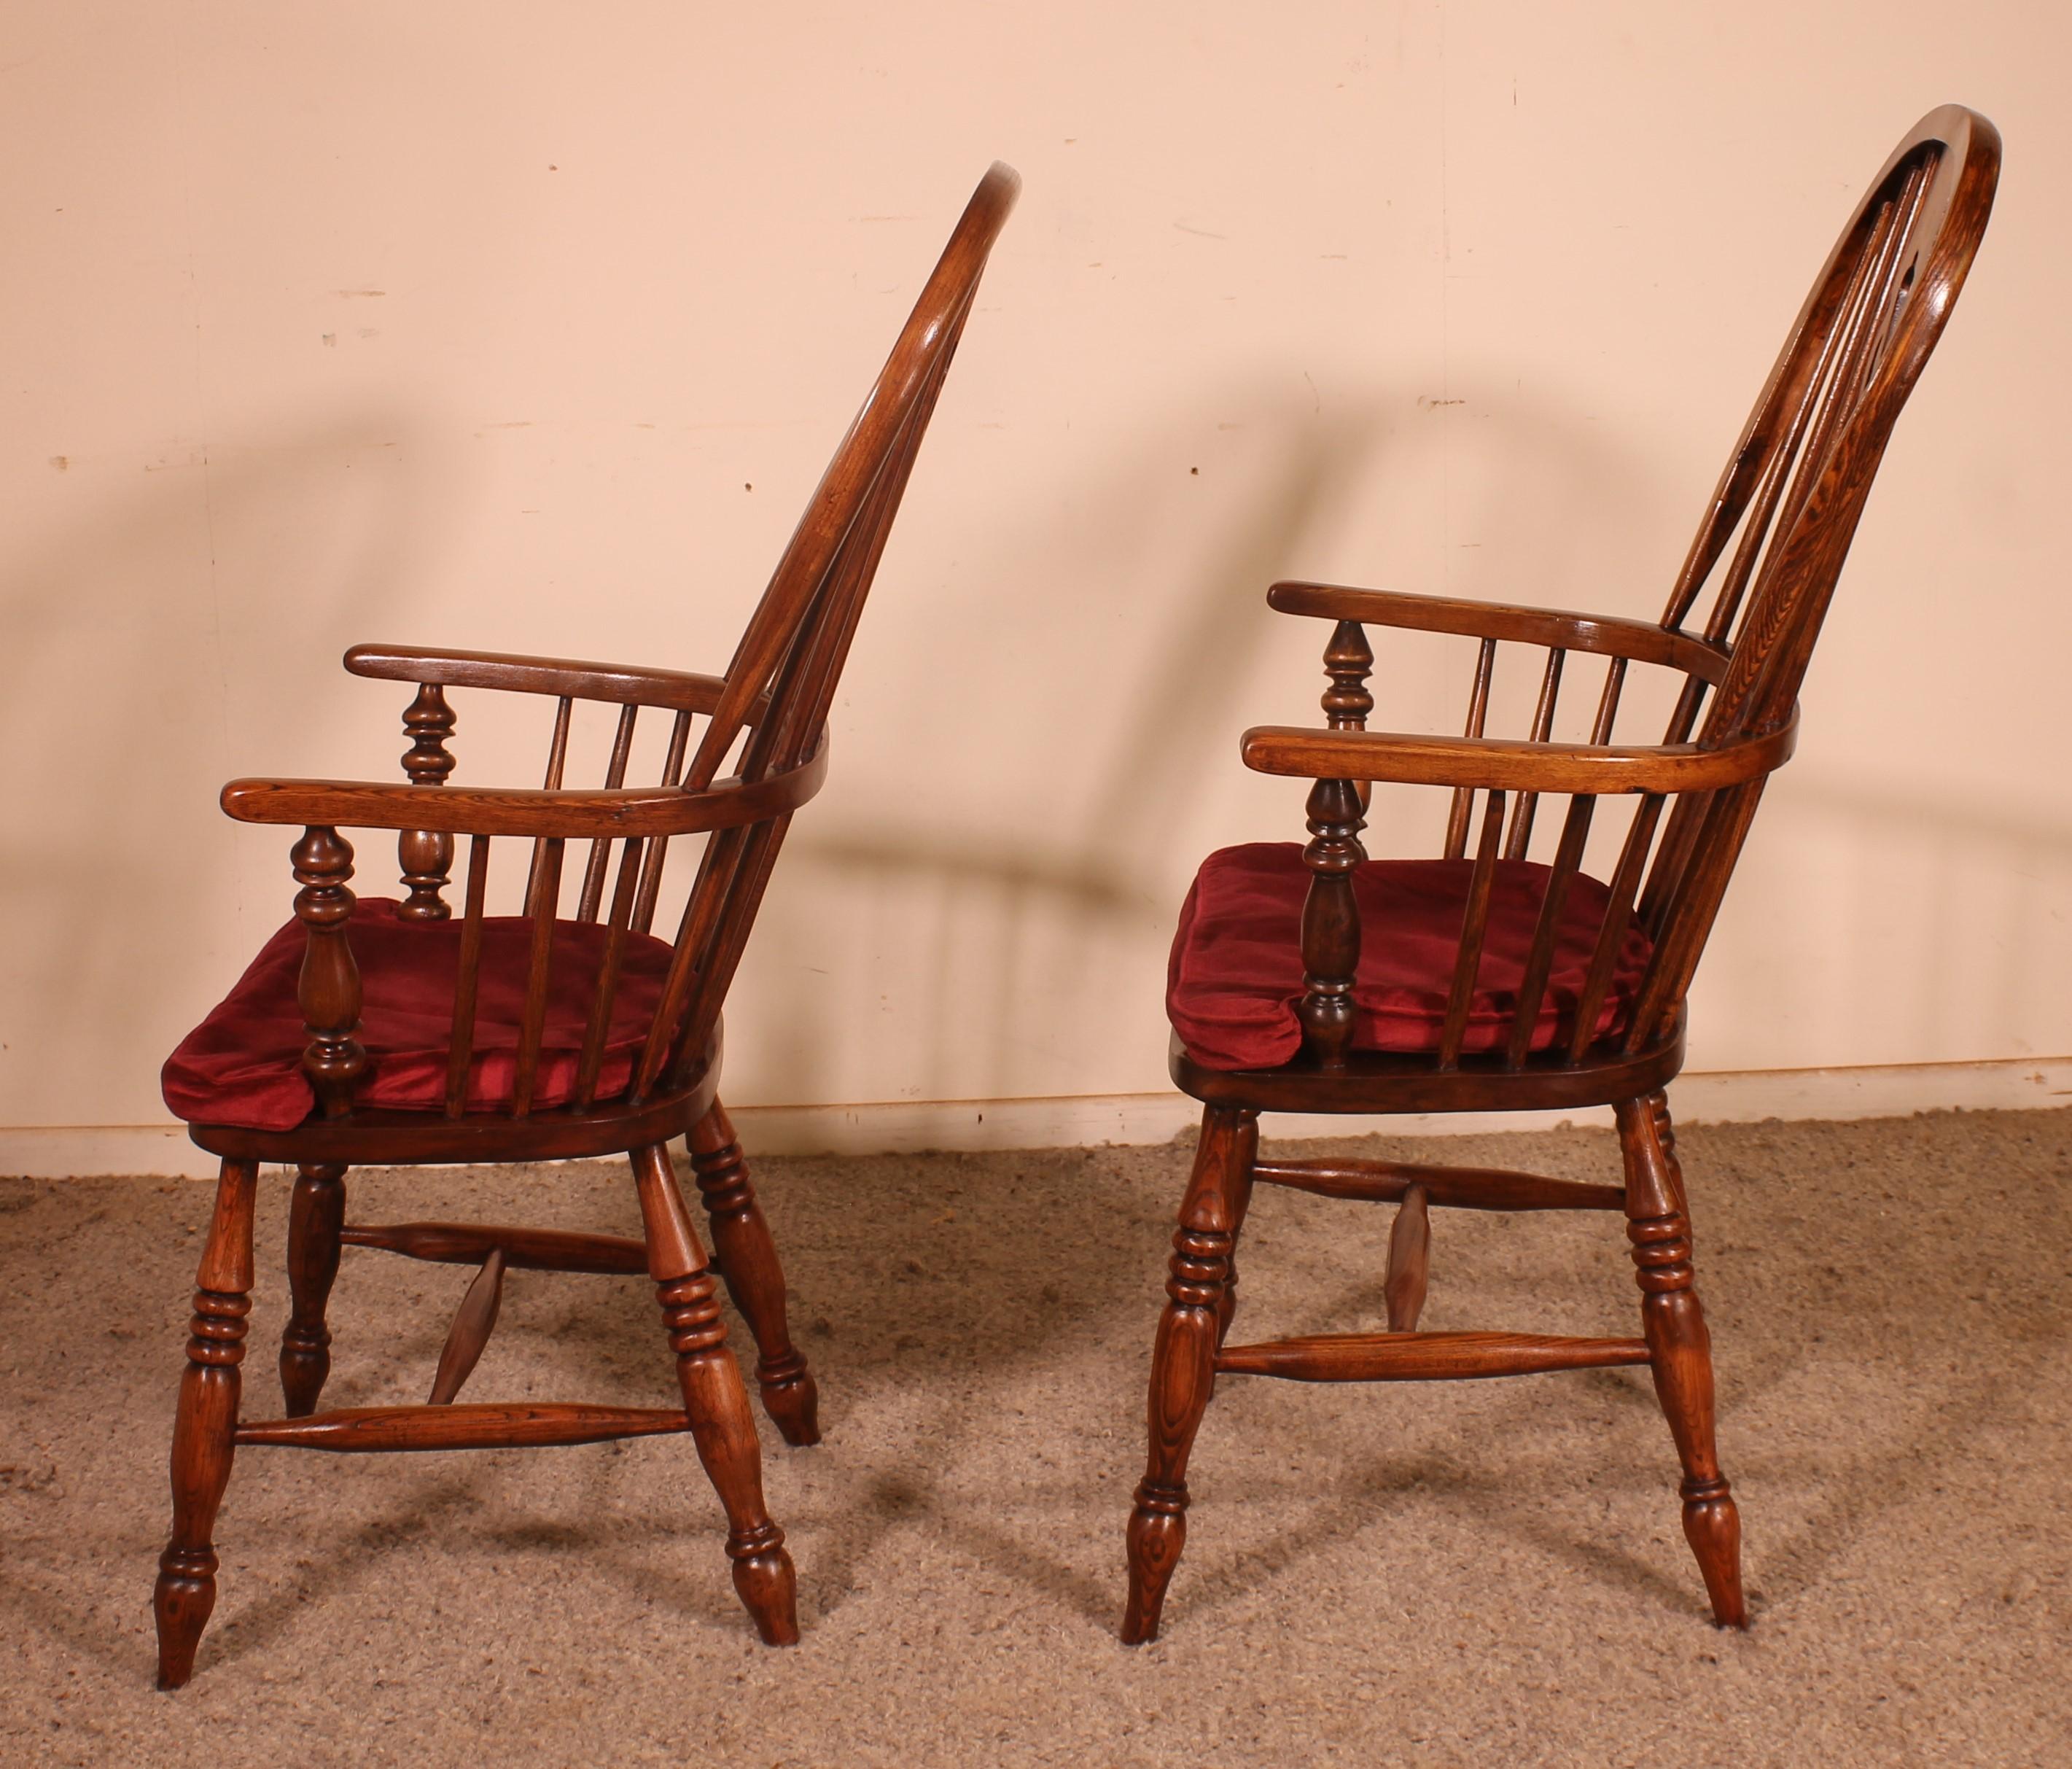 British Near Pair of English Windsor Armchairs from the 19th Century